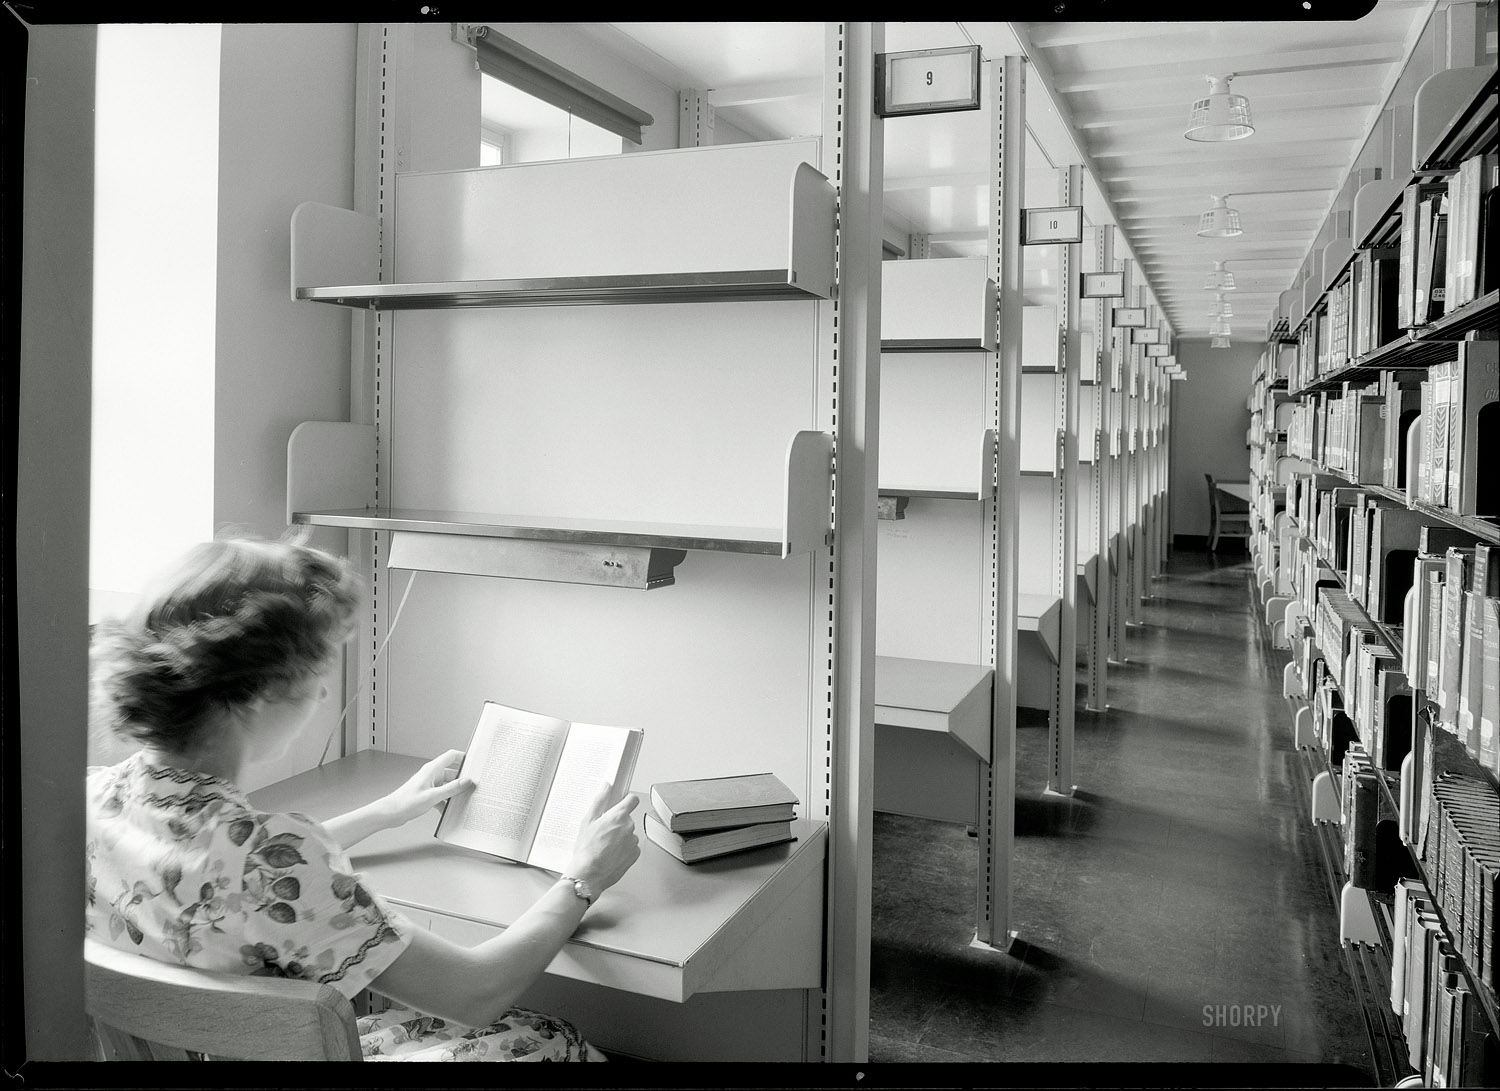 June 29, 1944. "Connecticut College for Women, New London. Palmer Library, carrels in stack room." Safety negative by Gottscho-Schleisner. View full size.